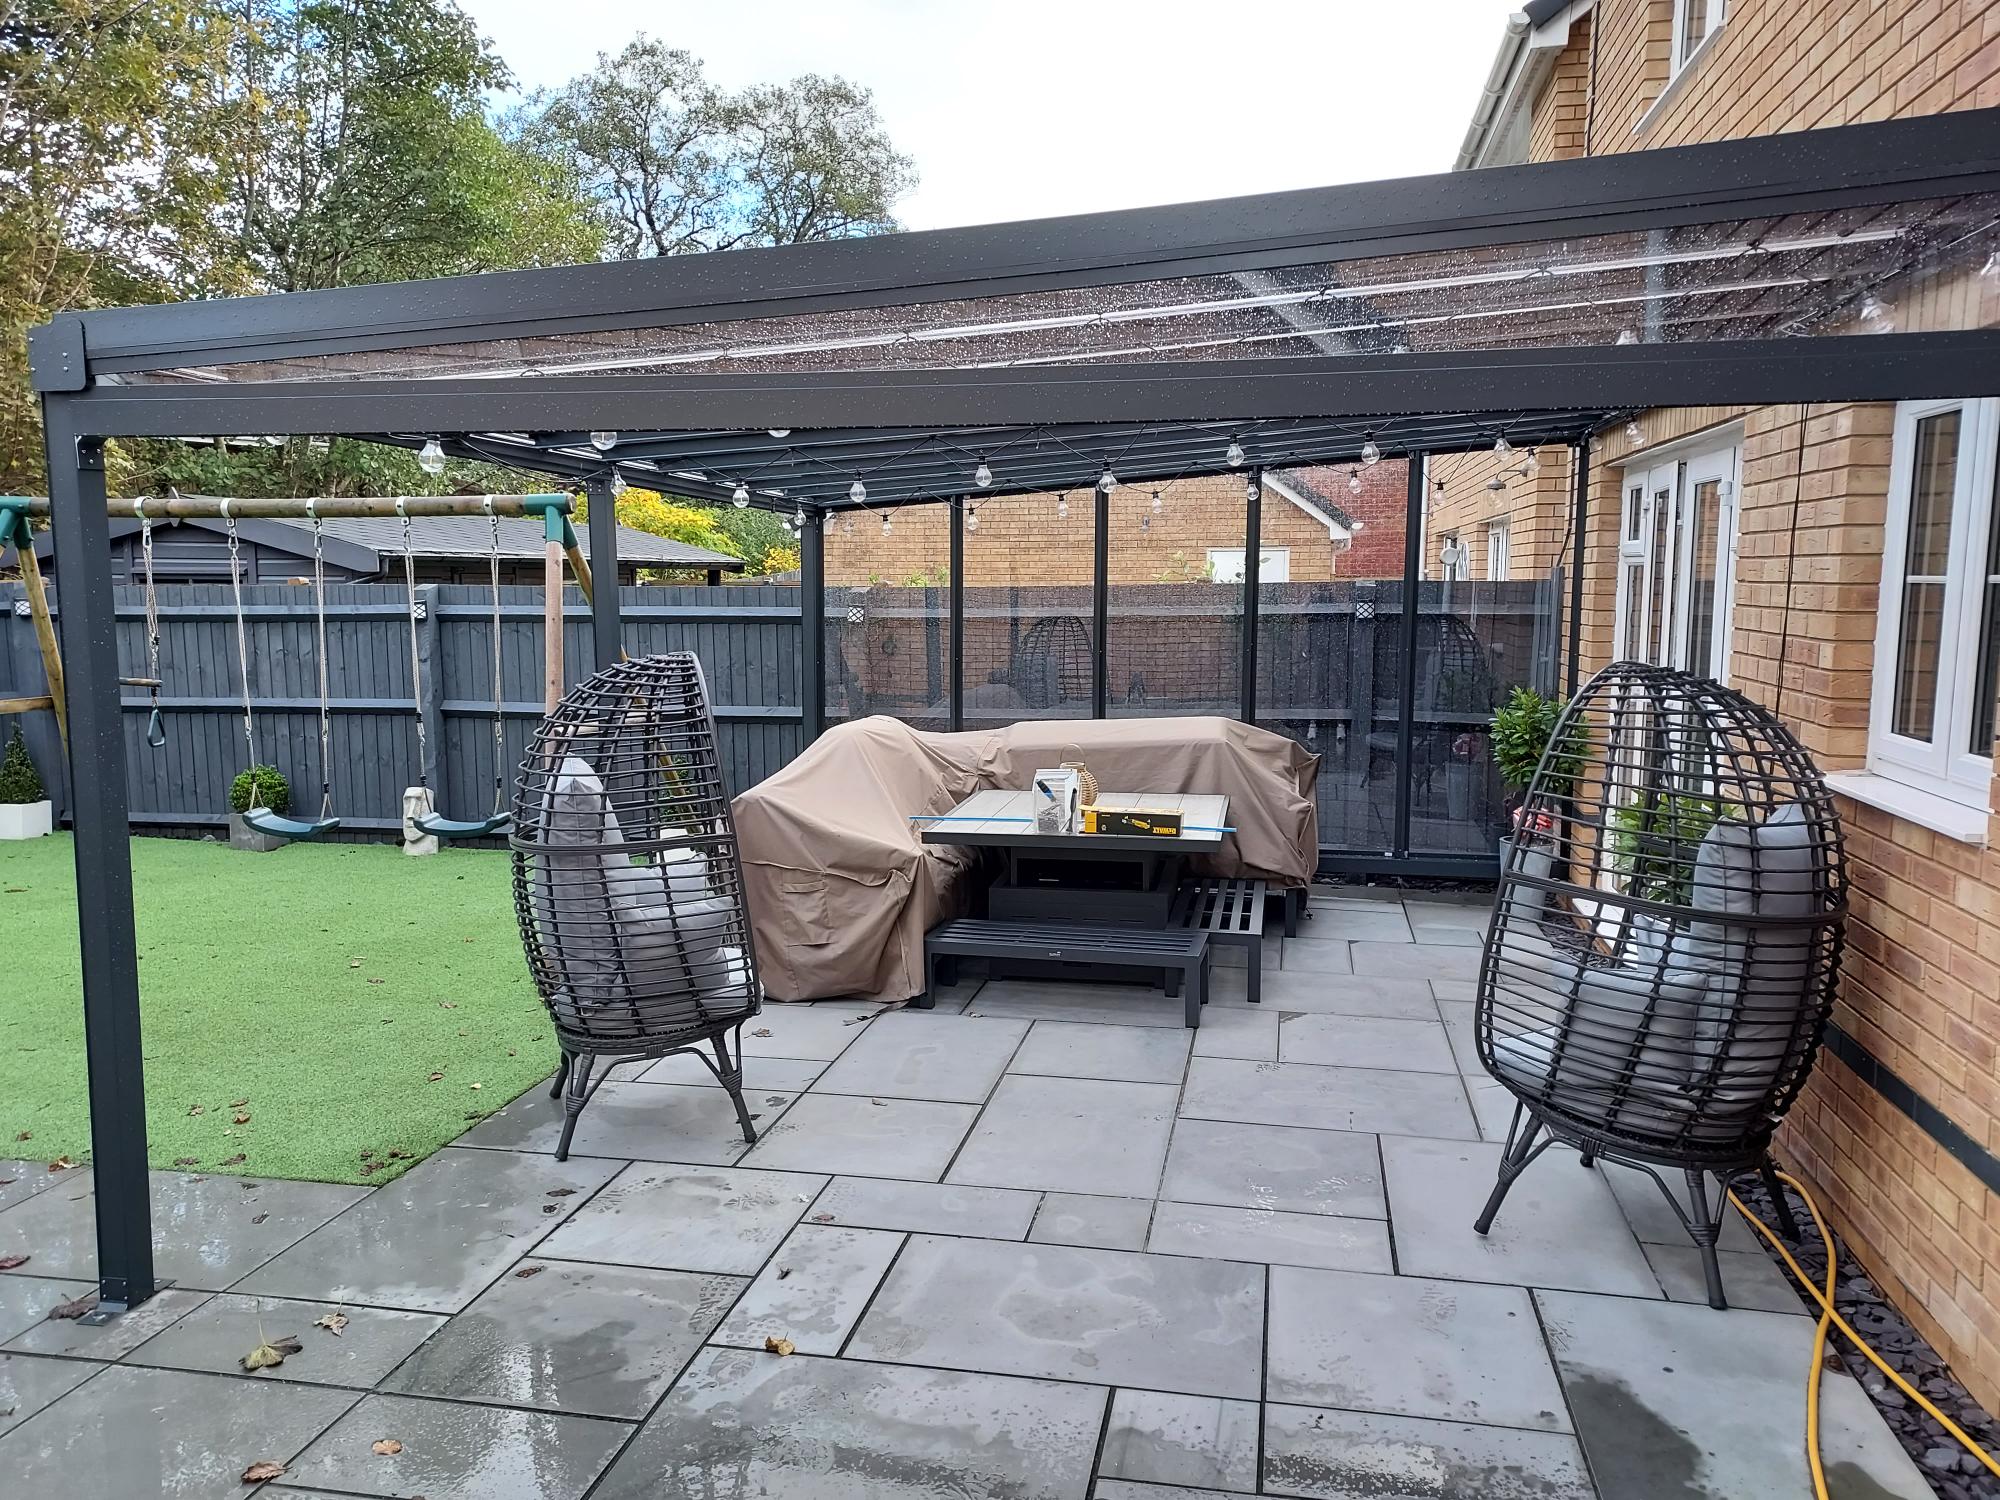 Wall-Mounted Lean-To Canopy in Anthracite Grey, Glass Clear 6mm Plate Polycarbonate Glazing